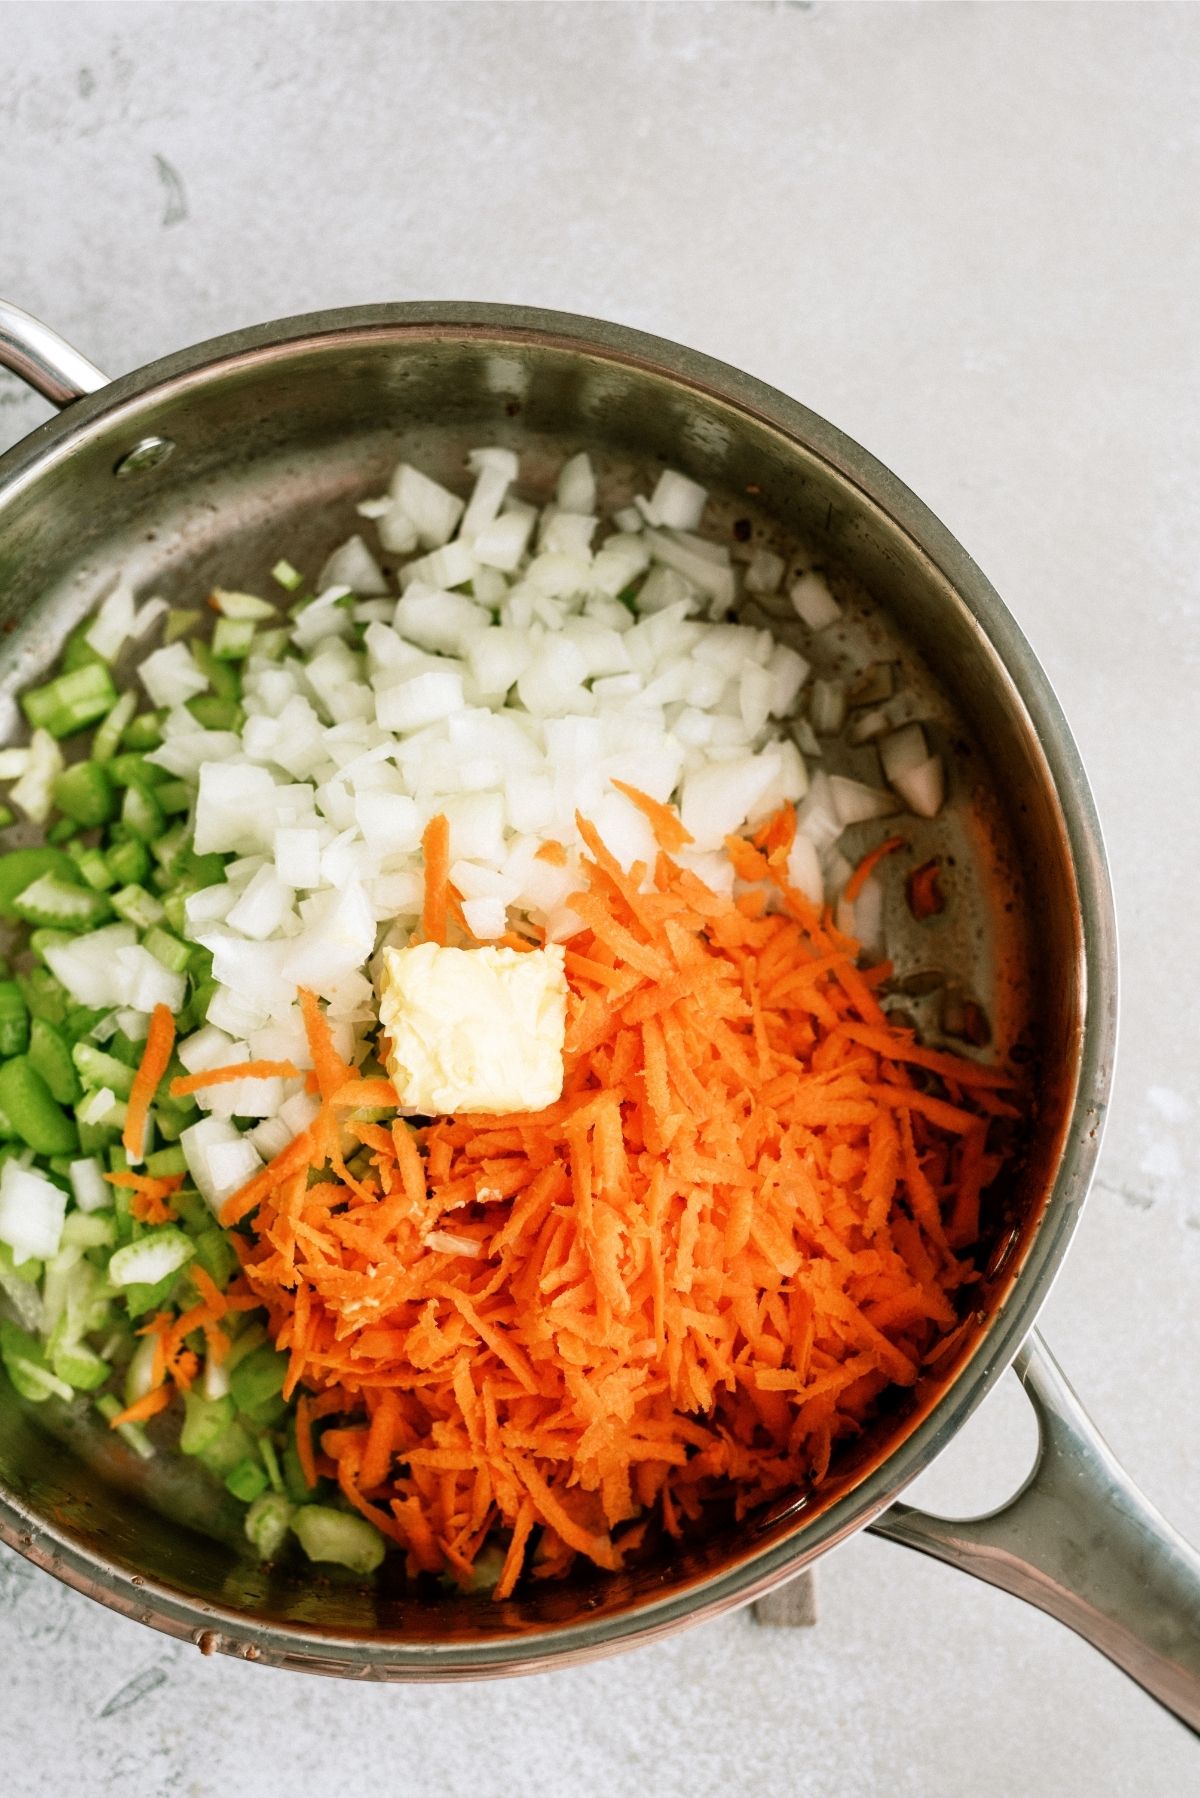 Skillet with butter, onions, celery and shredded carrots